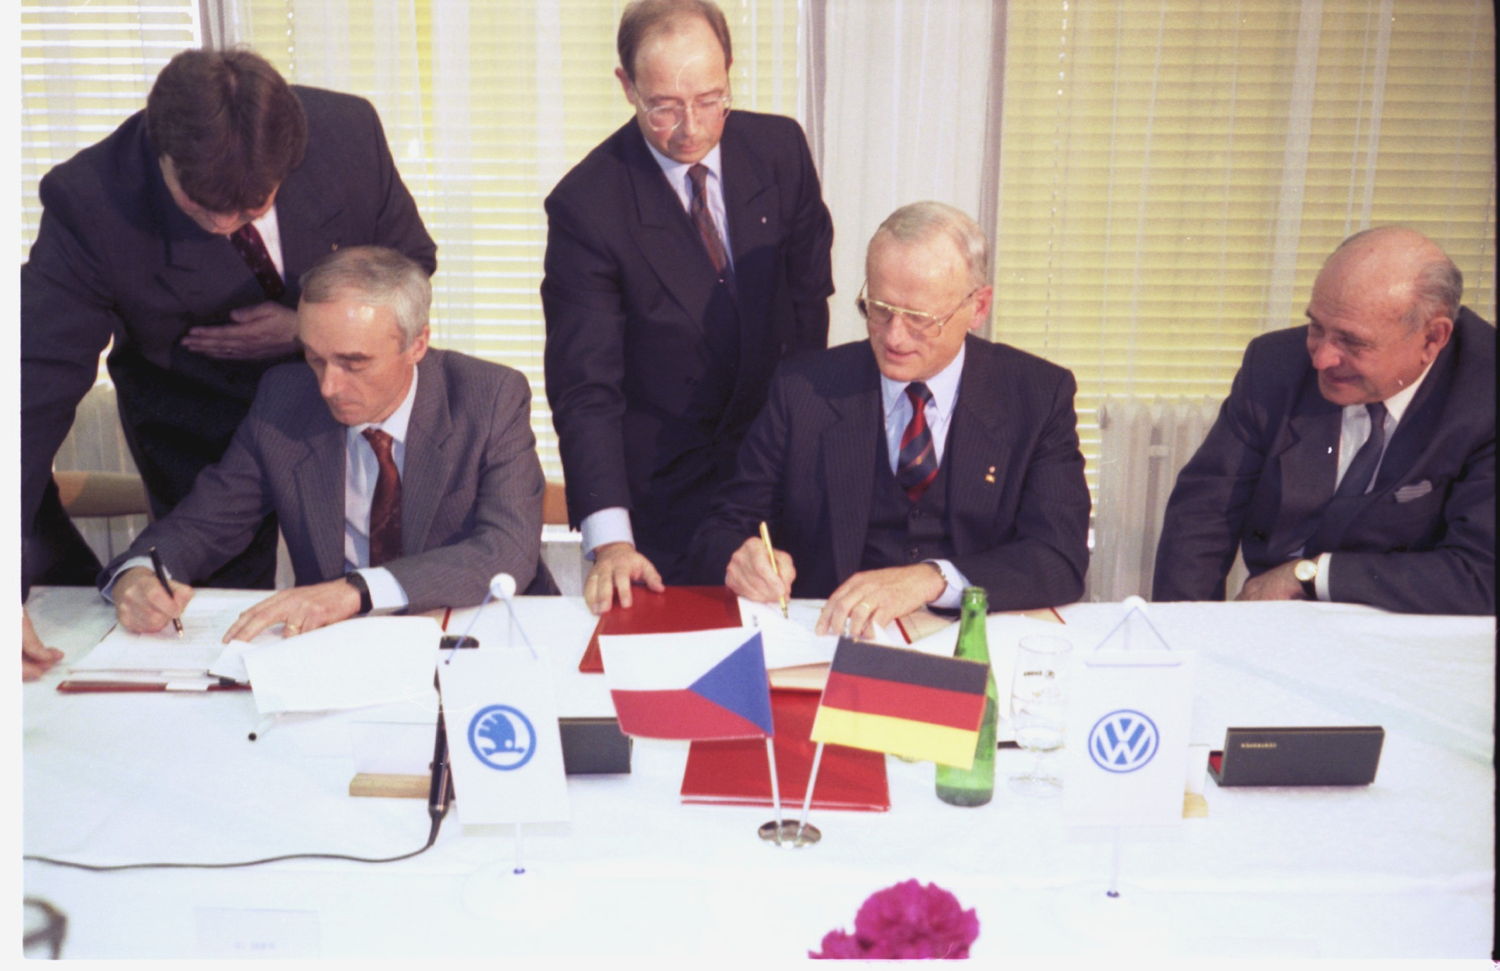 The ŠKODA brand has been part of the Volkswagen Group
for almost 30 years. The historic step on 16 April 1991 laid
the foundation for the dynamic rise of the Czech car
manufacturer and supplier of mobility solutions.
